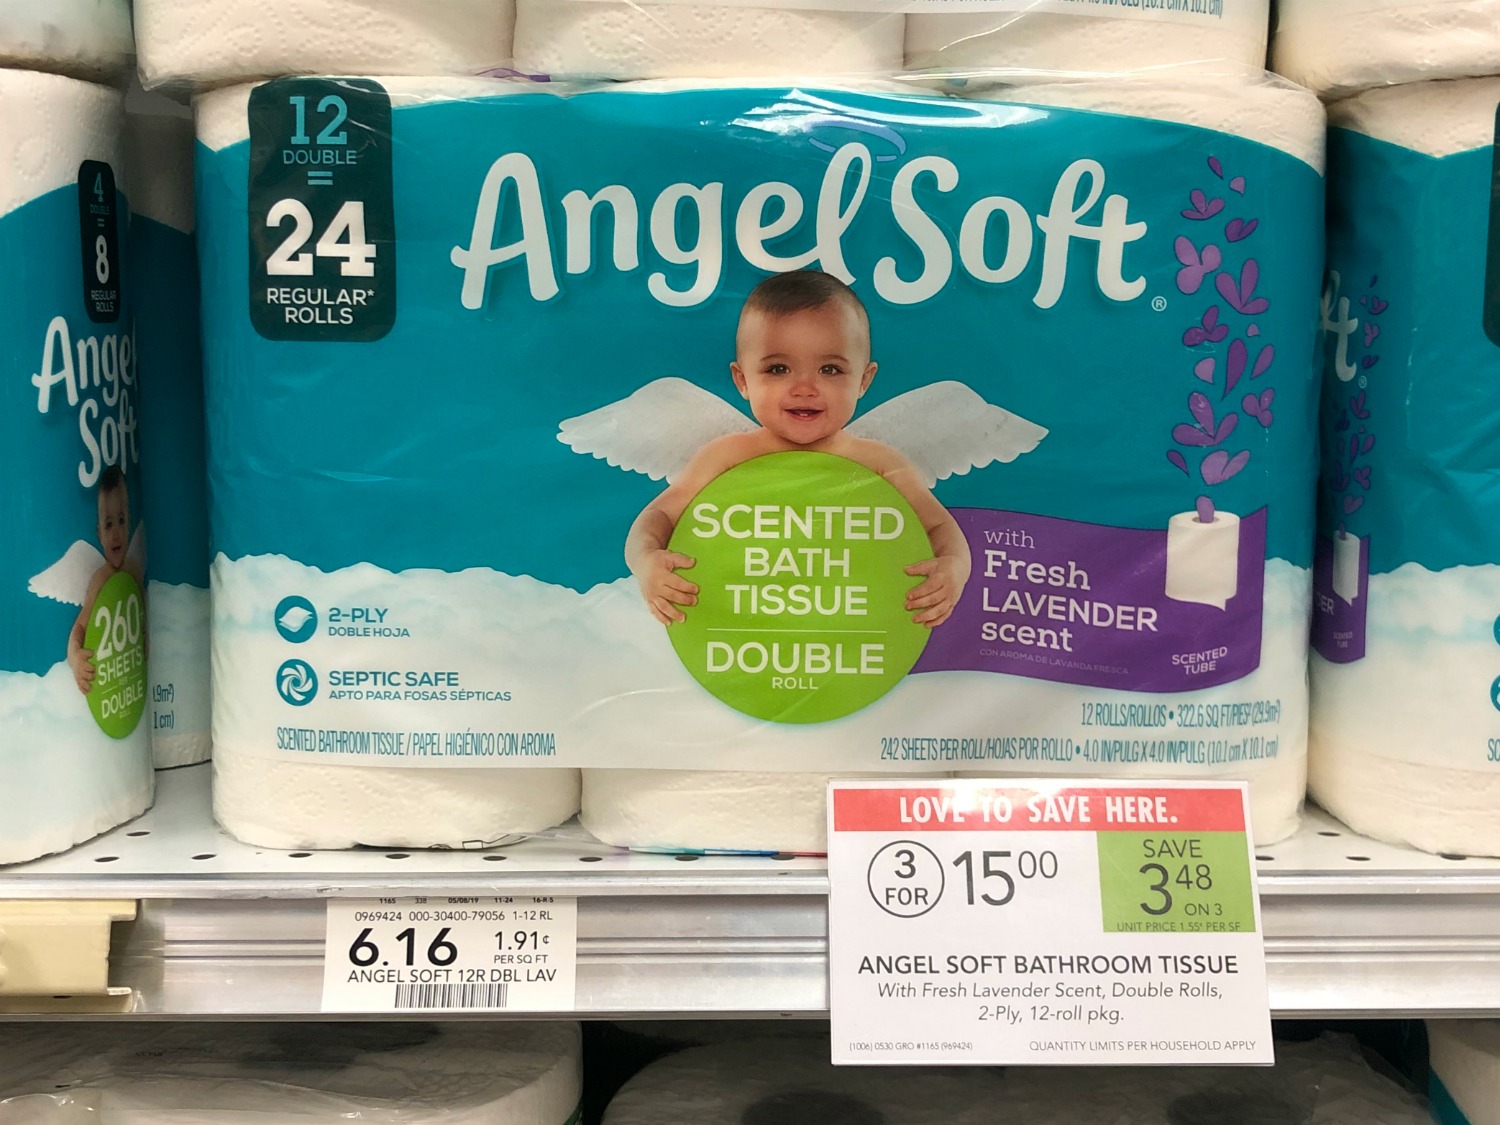 Can't-Miss Deal On Angel Soft Bathroom Tissue At Publix - Try New Angel Soft With Fresh Lavender Scent on I Heart Publix